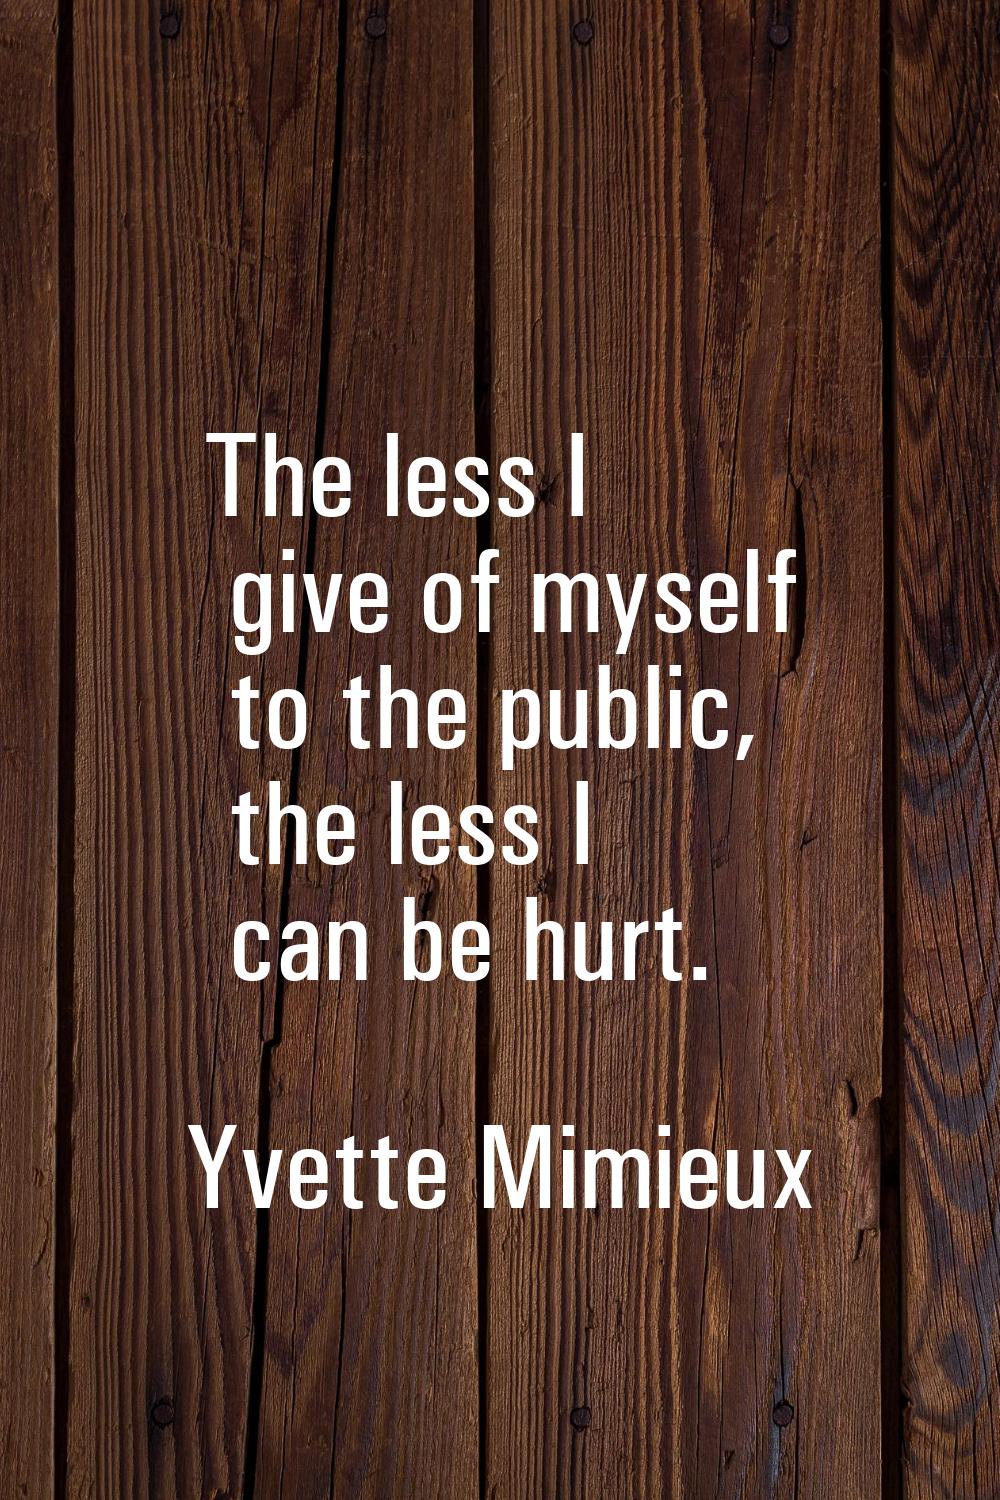 The less I give of myself to the public, the less I can be hurt.